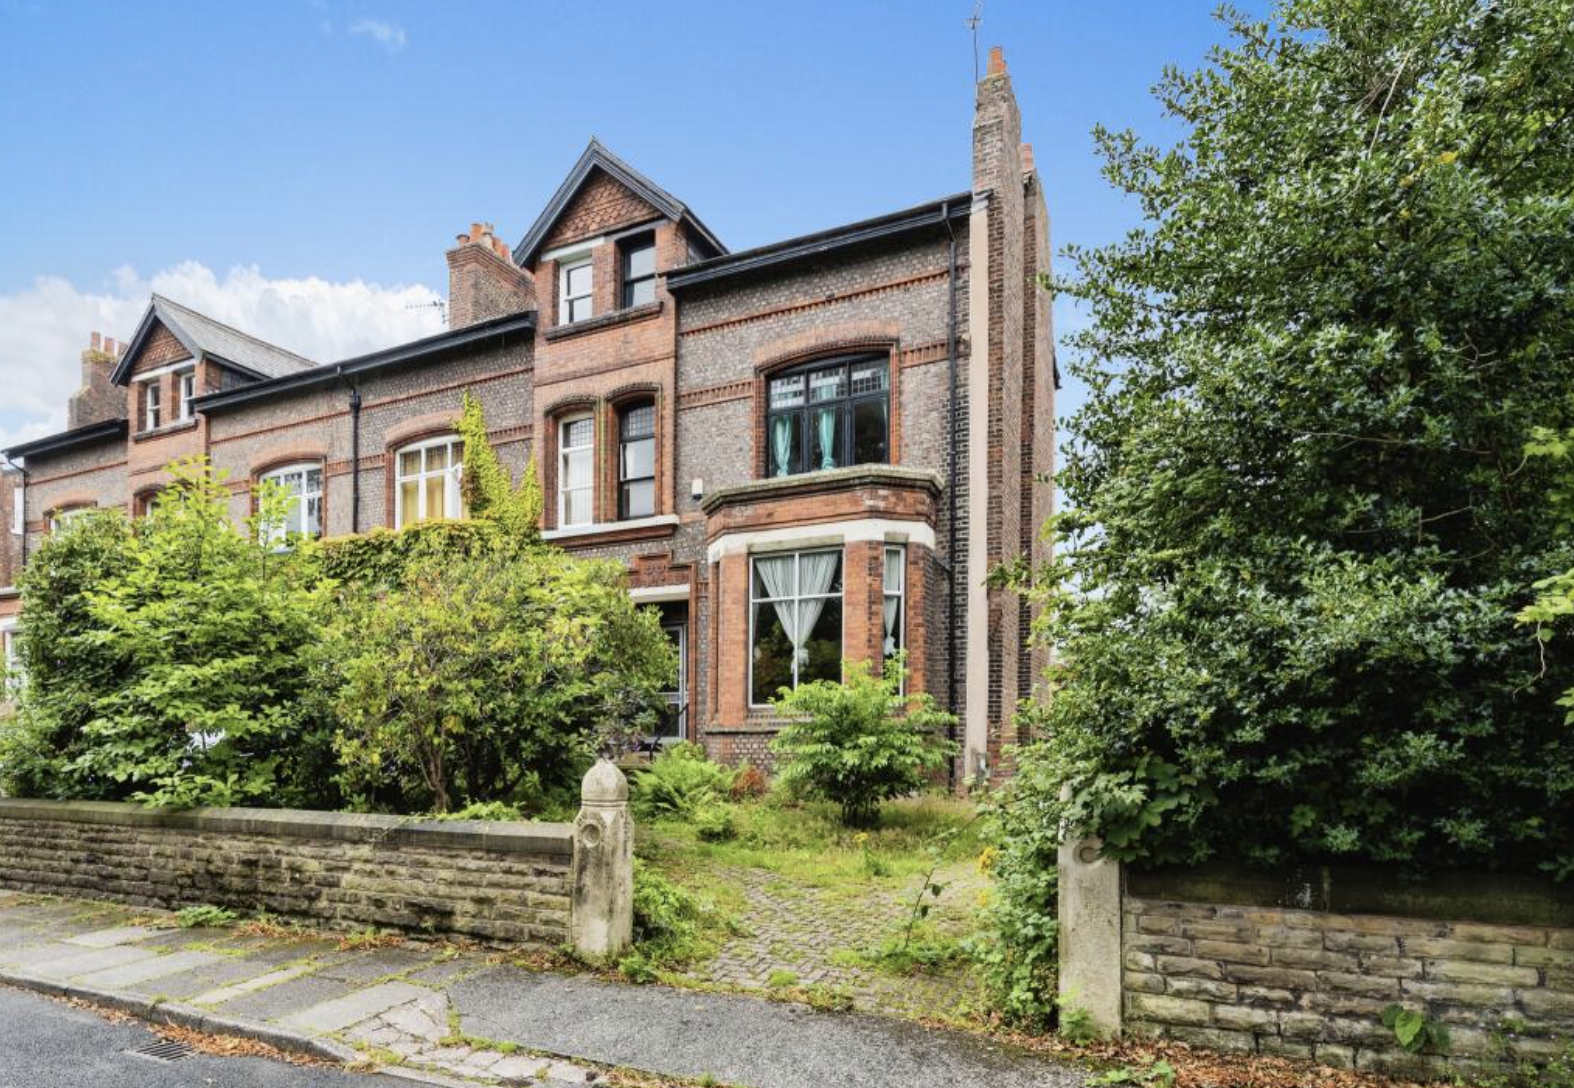 This Greater Manchester property needs full modernisation